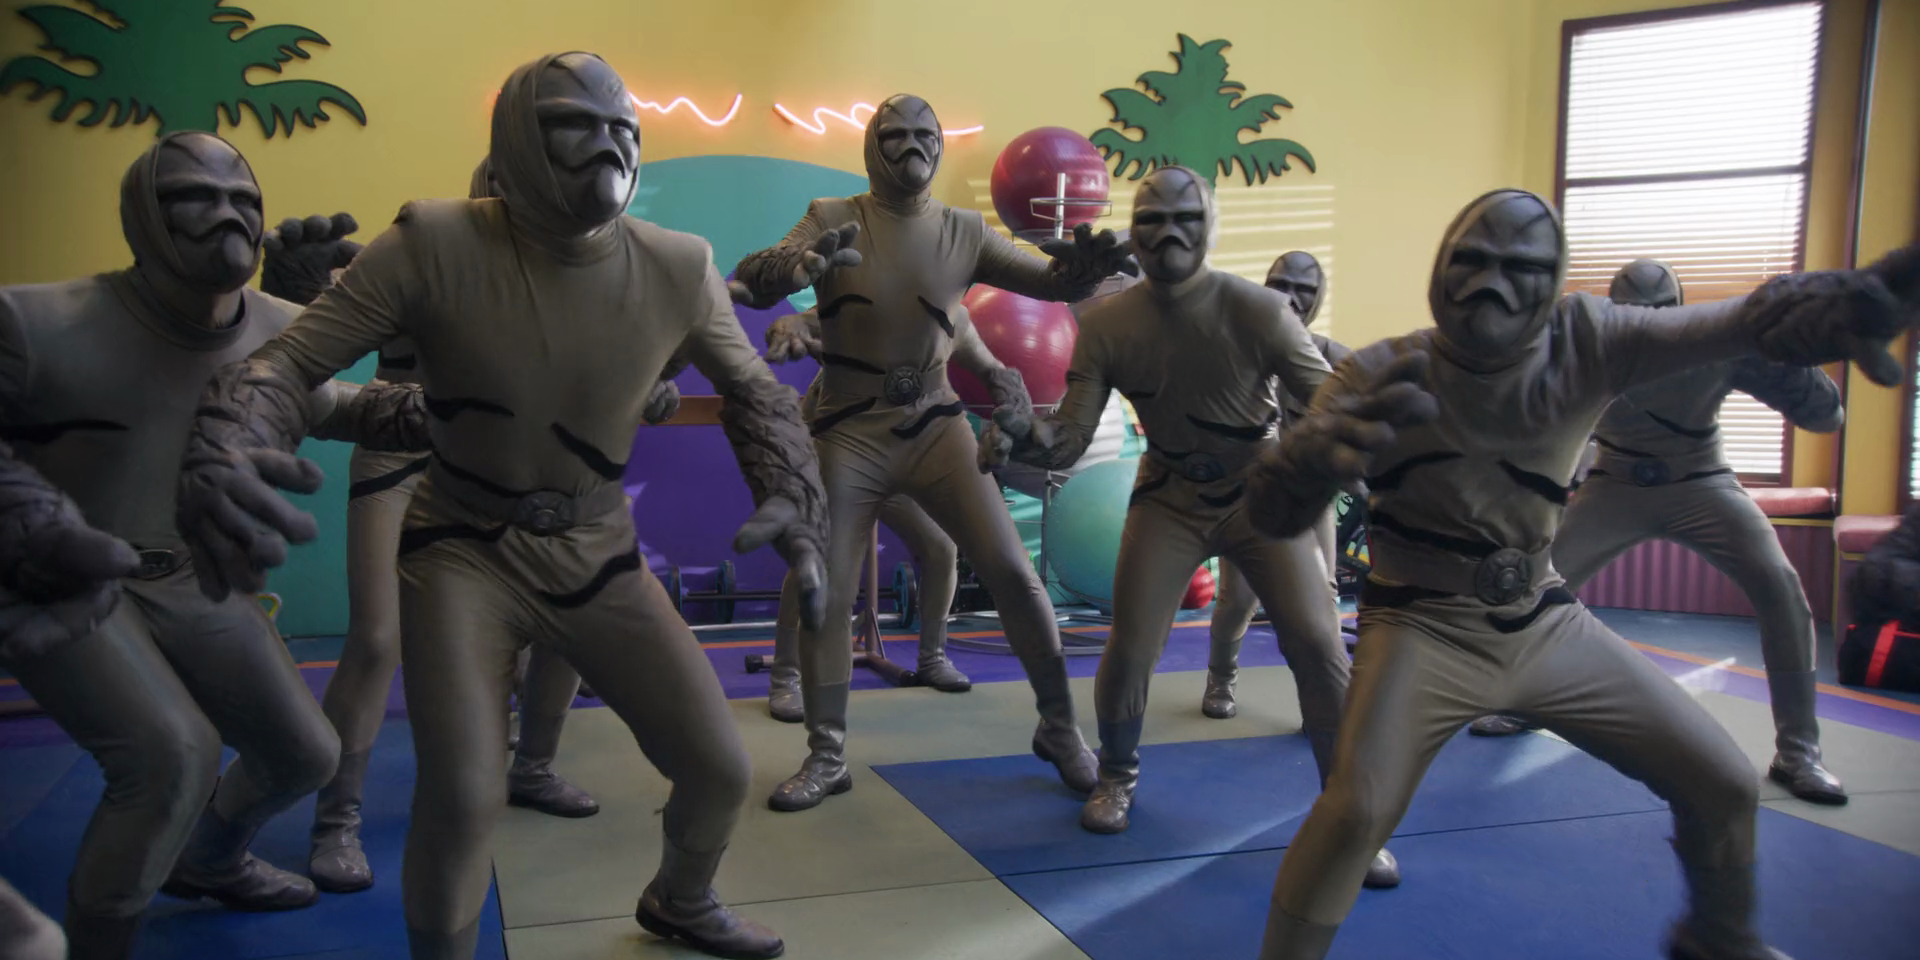 putty-patrollers-power-rangers Cropped